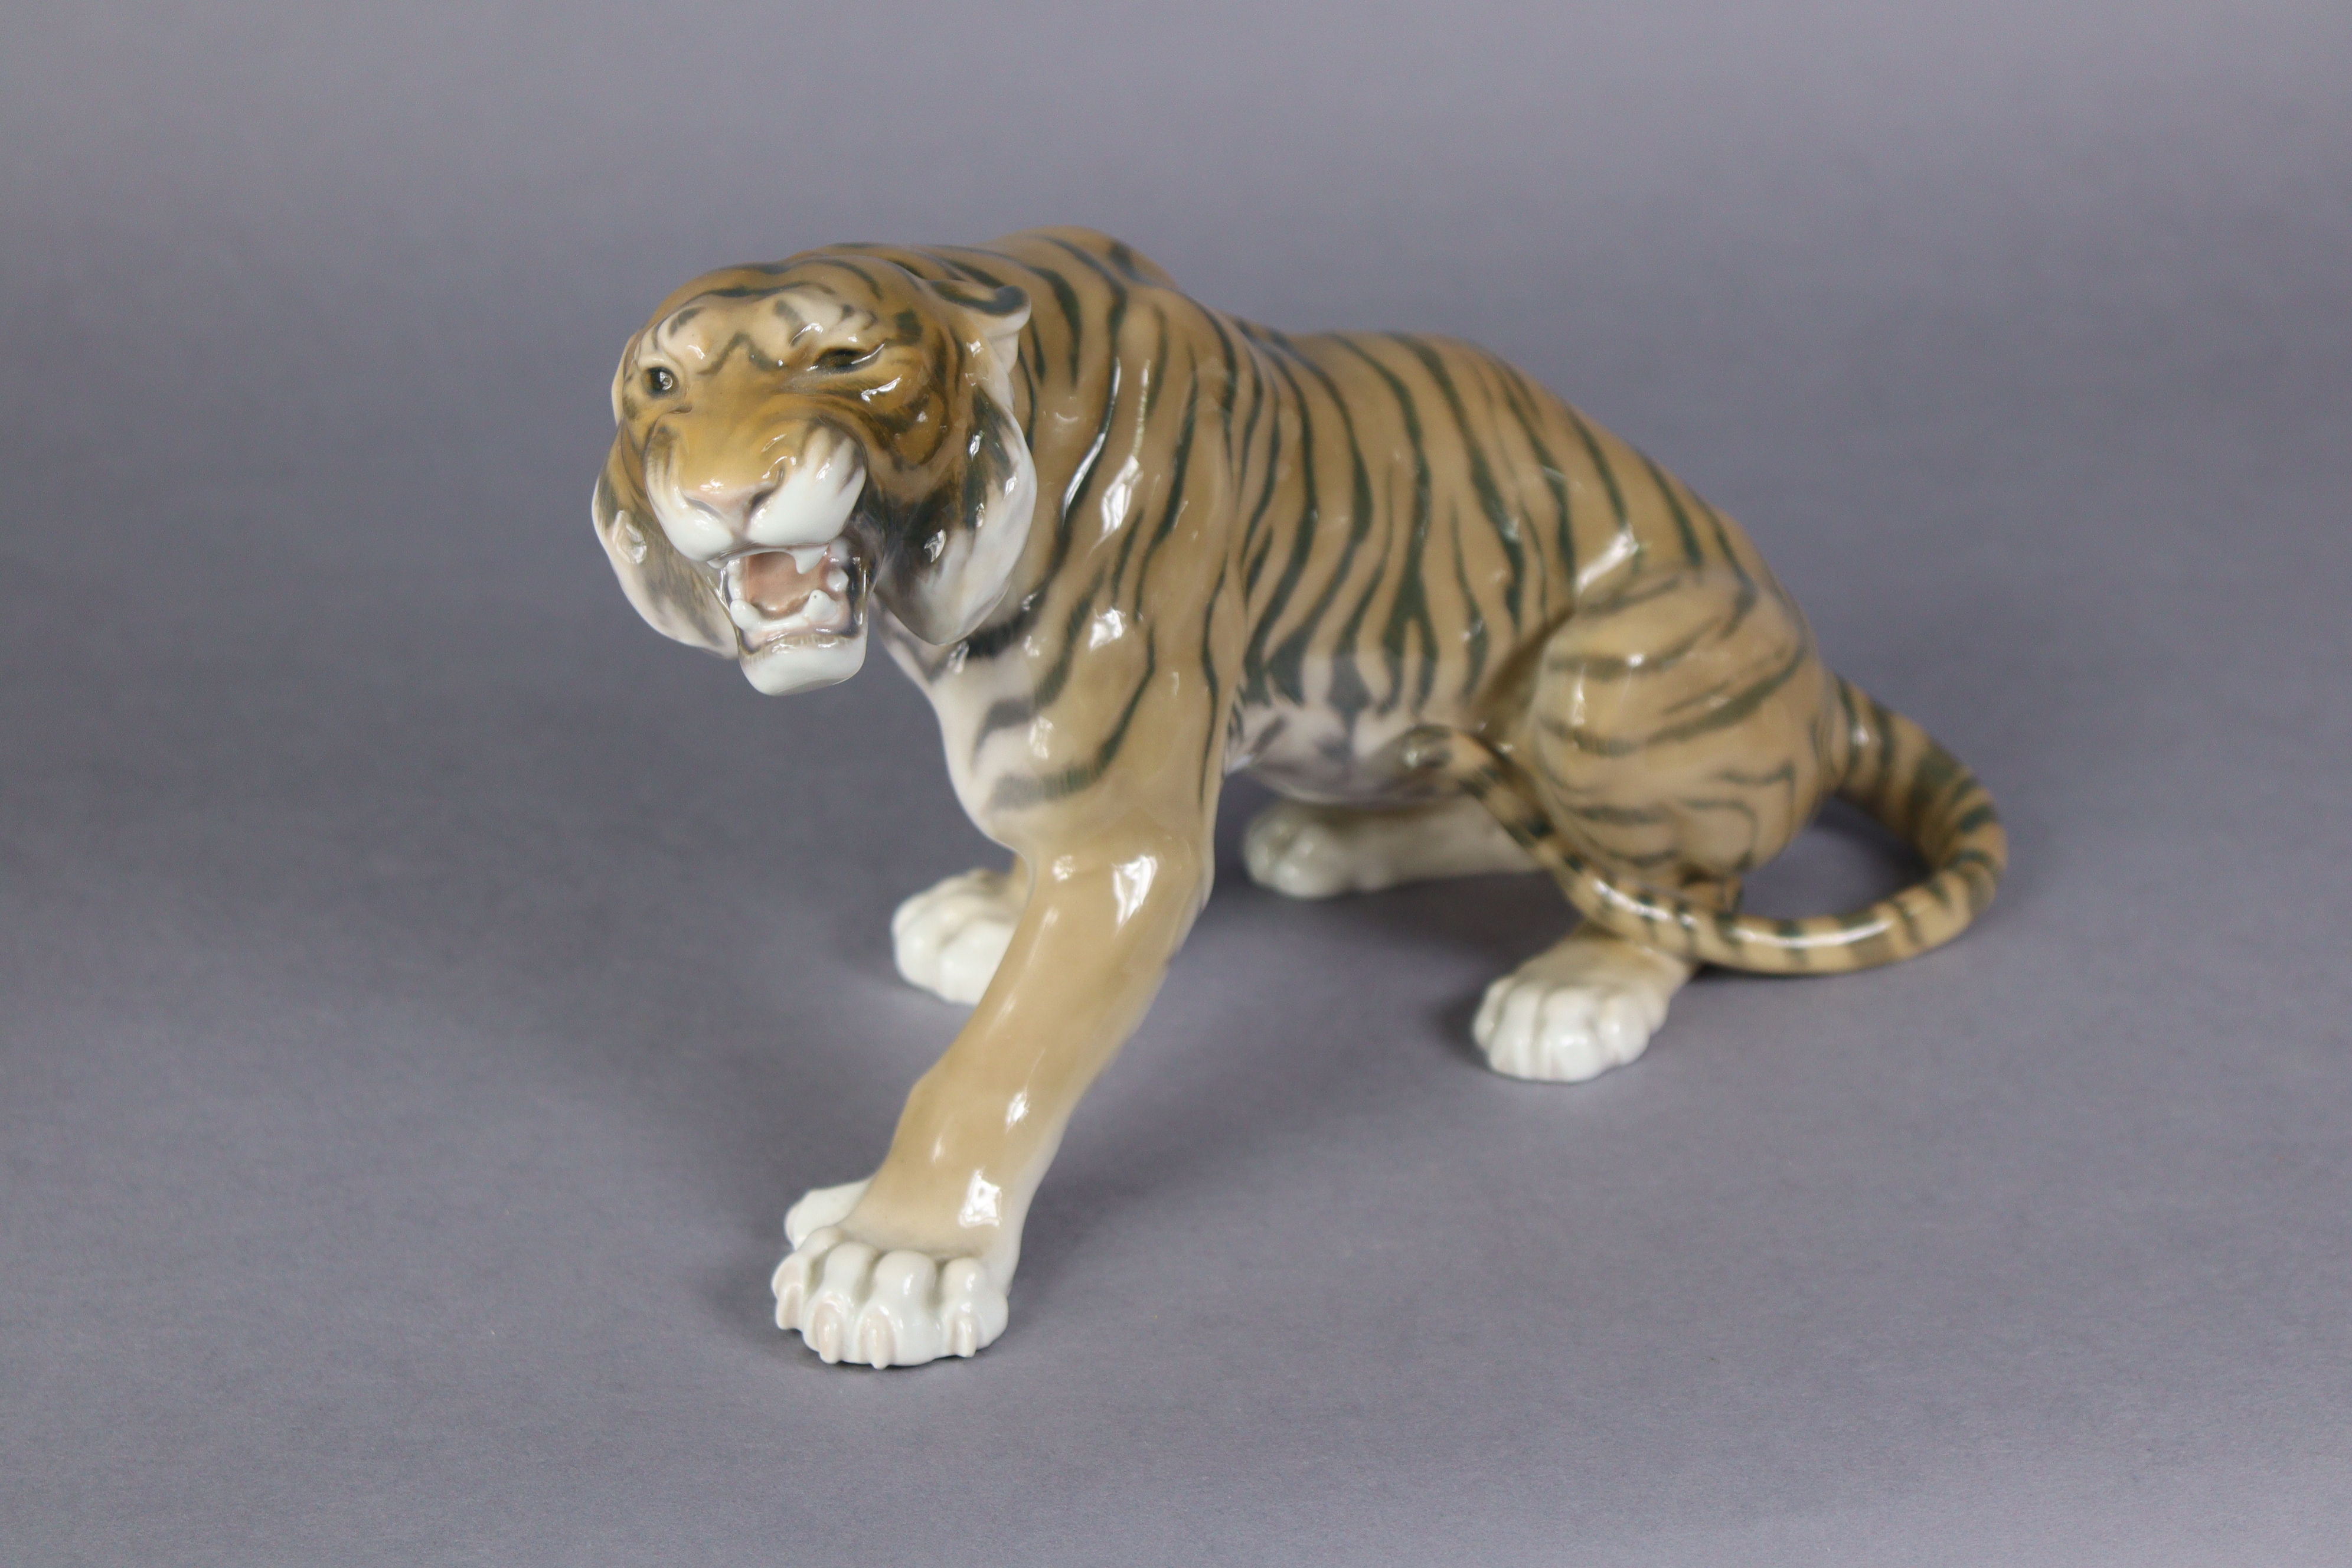 A Bing & Grondahl porcelain model of a tiger, No. 1712 by Lauritz Jensen, 11” long x 7” high. (hairl - Image 2 of 4